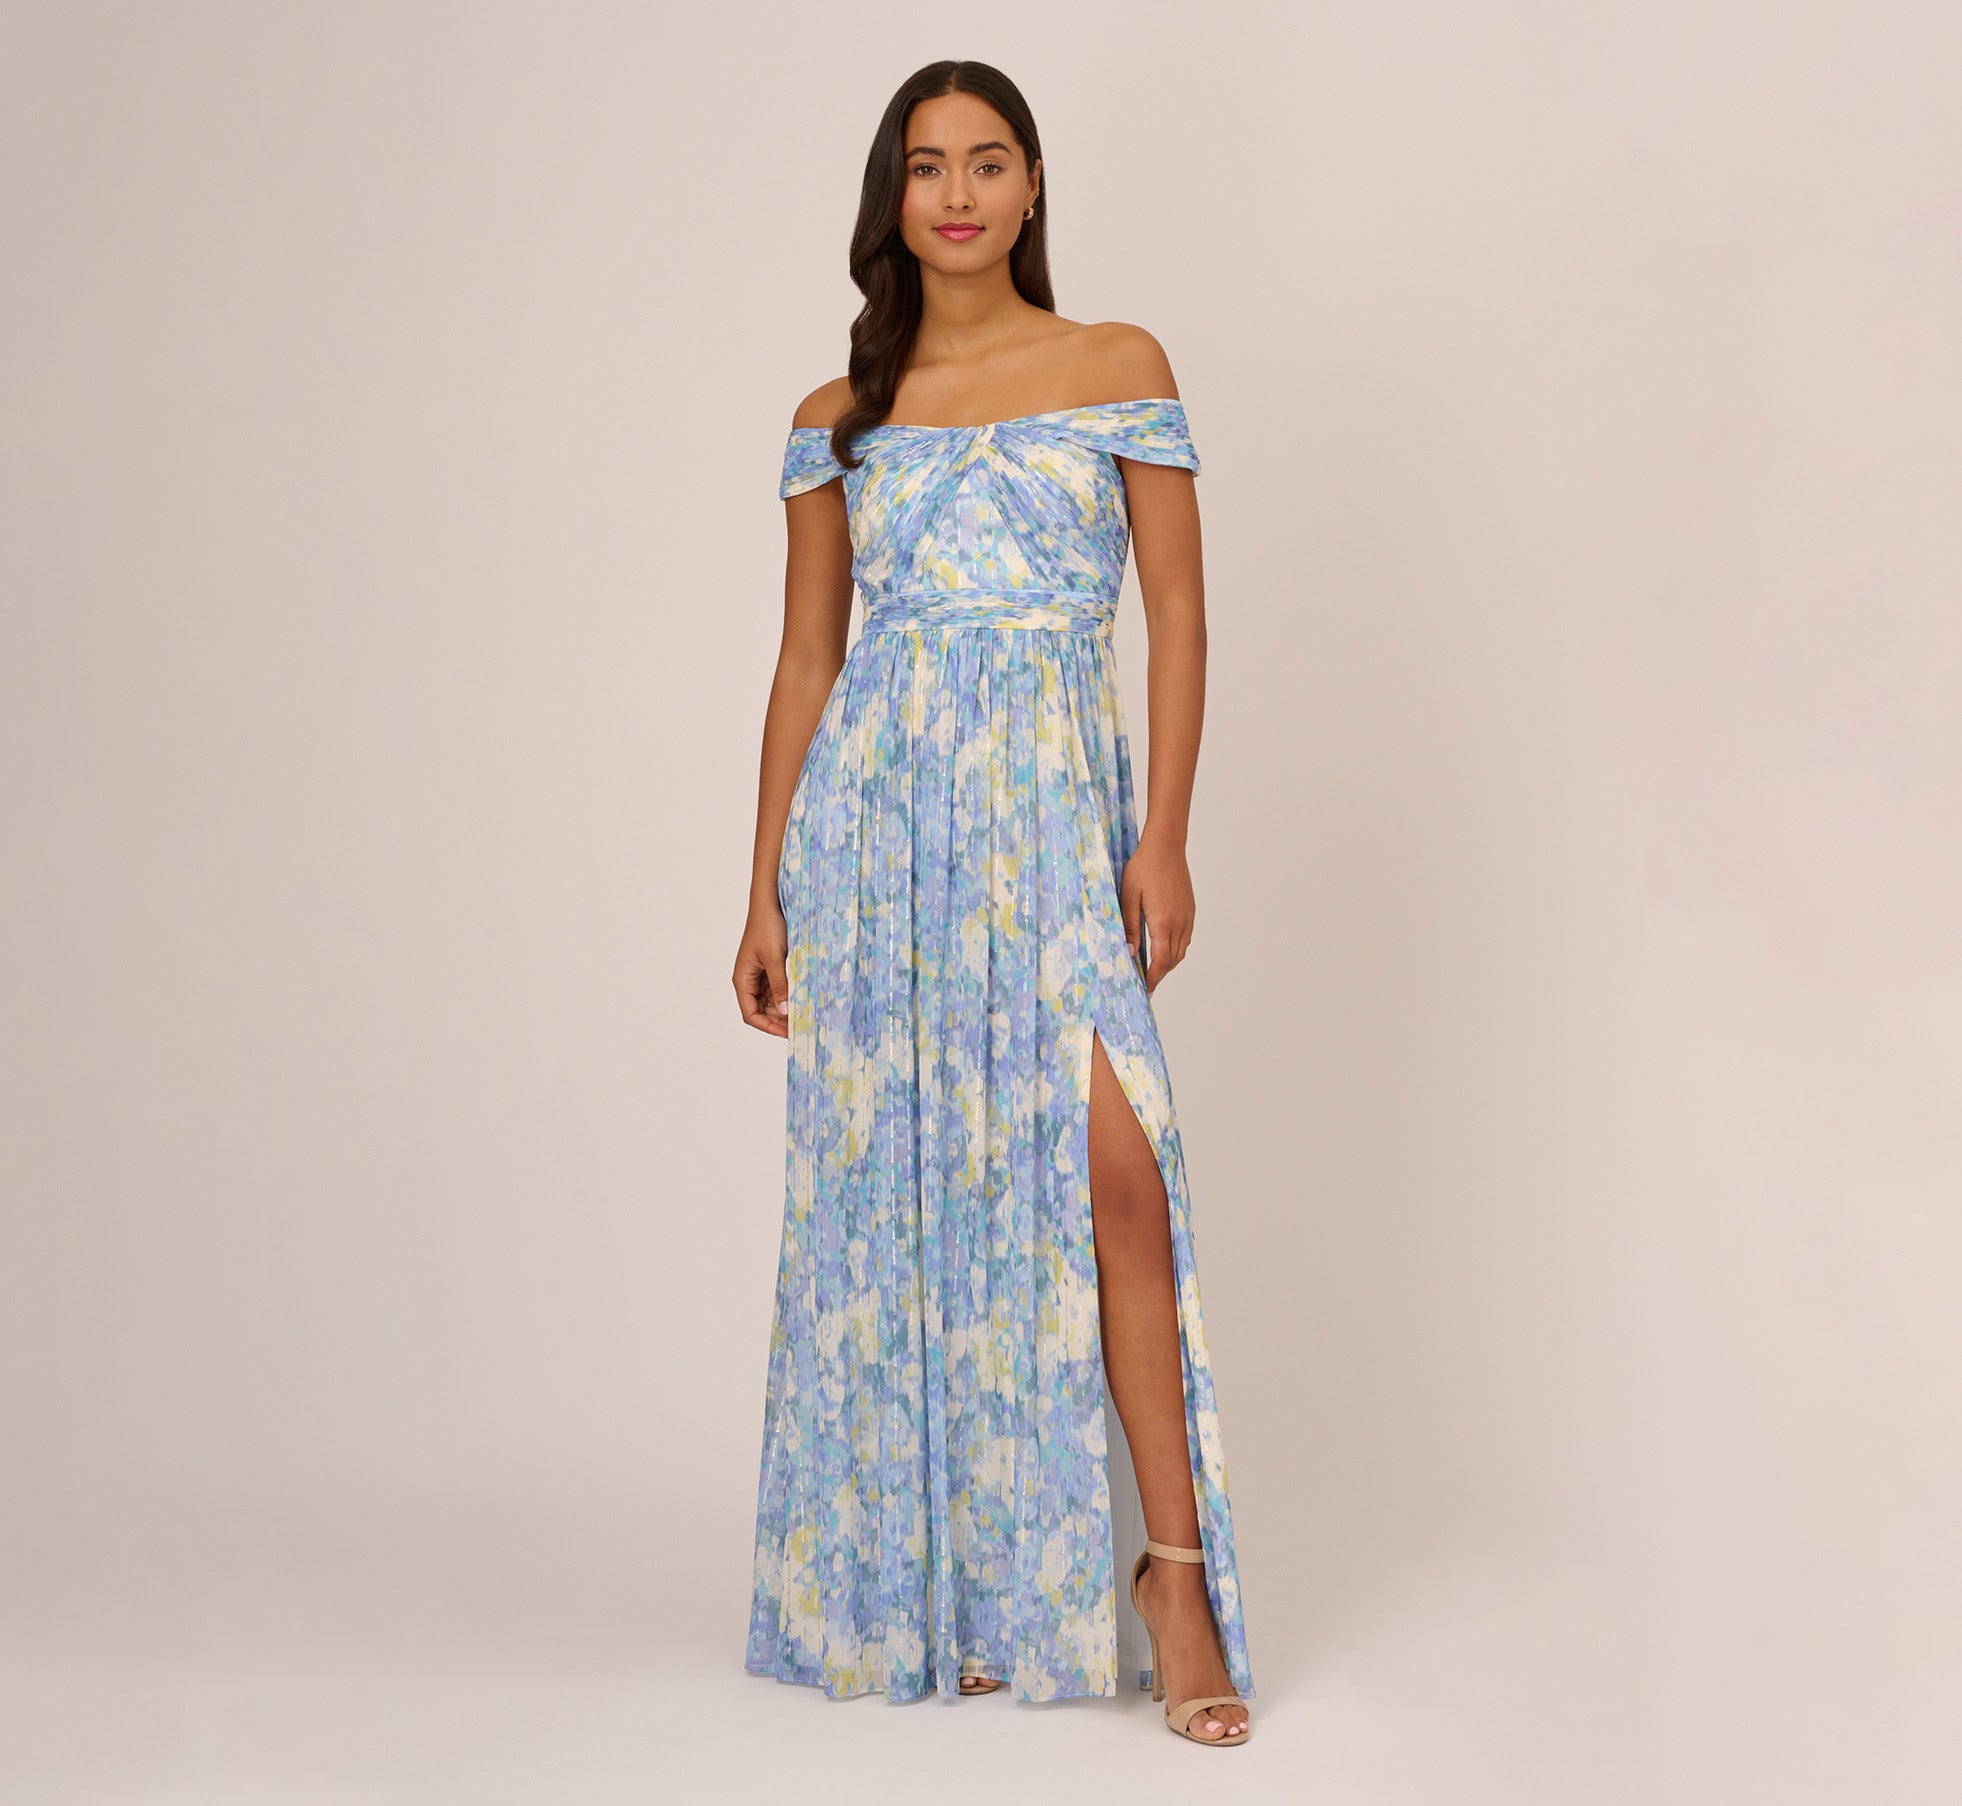 Off the Shoulder Blue Floral Print Ruffled Tulle Prom Dress – FancyVestido